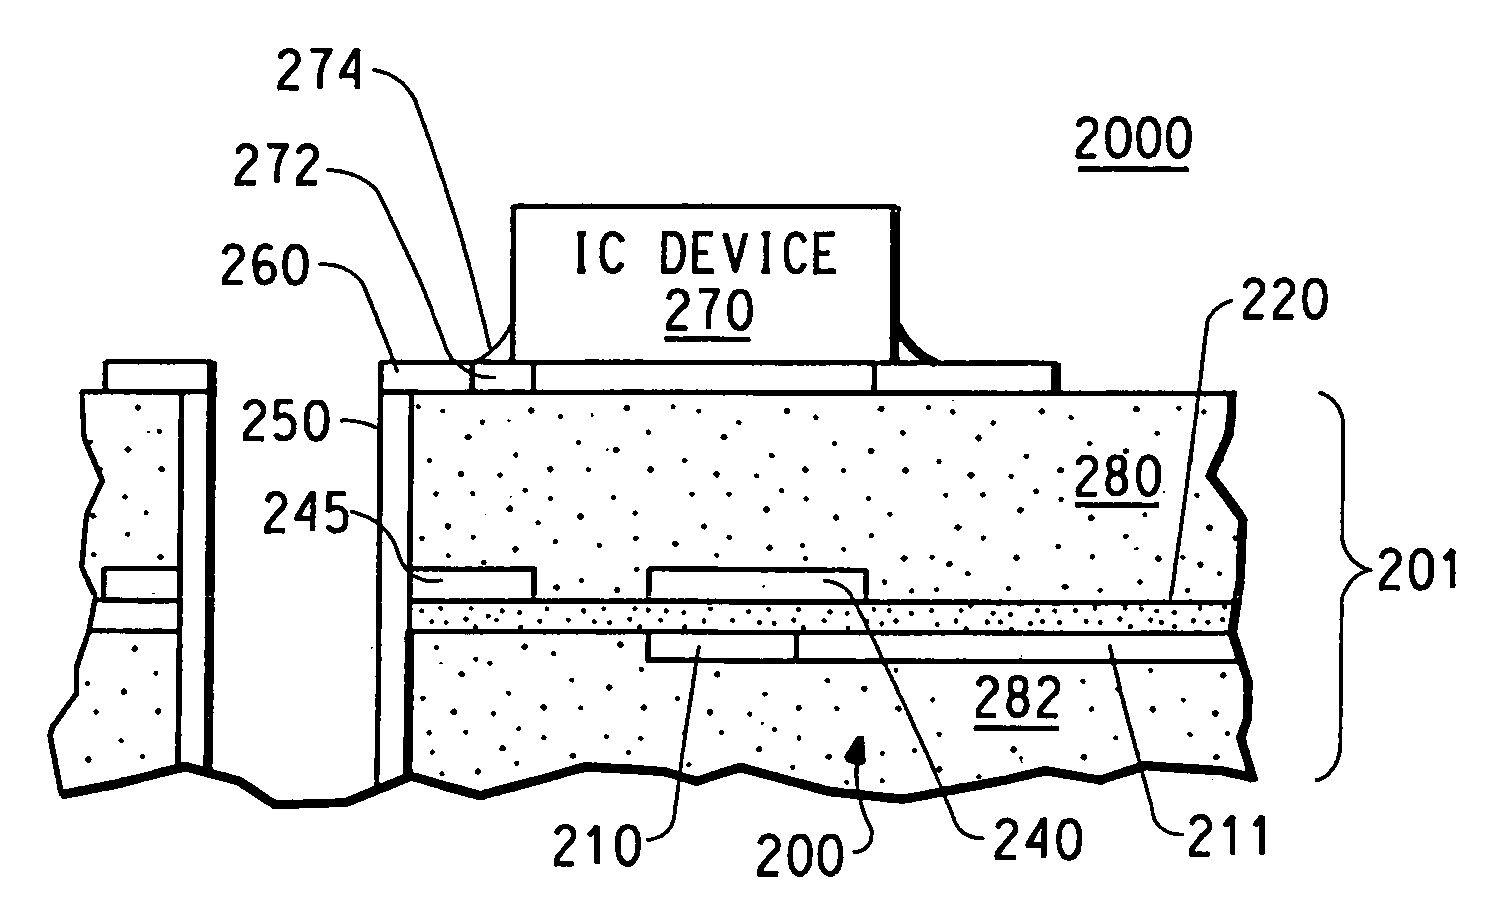 Capacitive devices, organic dielectric laminates, and printed wiring boards incorporating such devices, and methods of making thereof